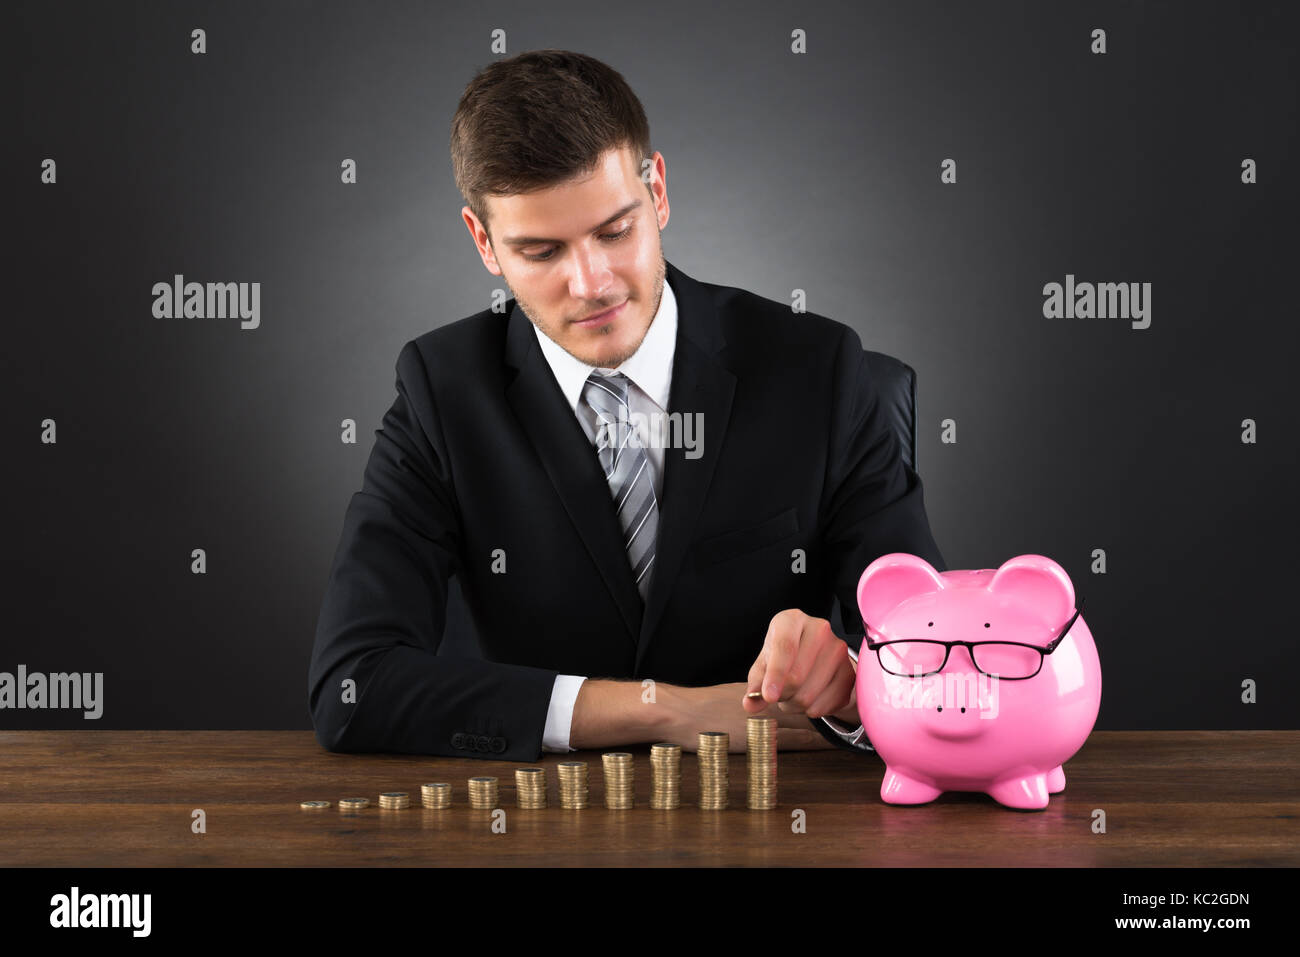 Portrait Of Young Businessman With Piggybank Stacking Coins On Desk Stock Photo